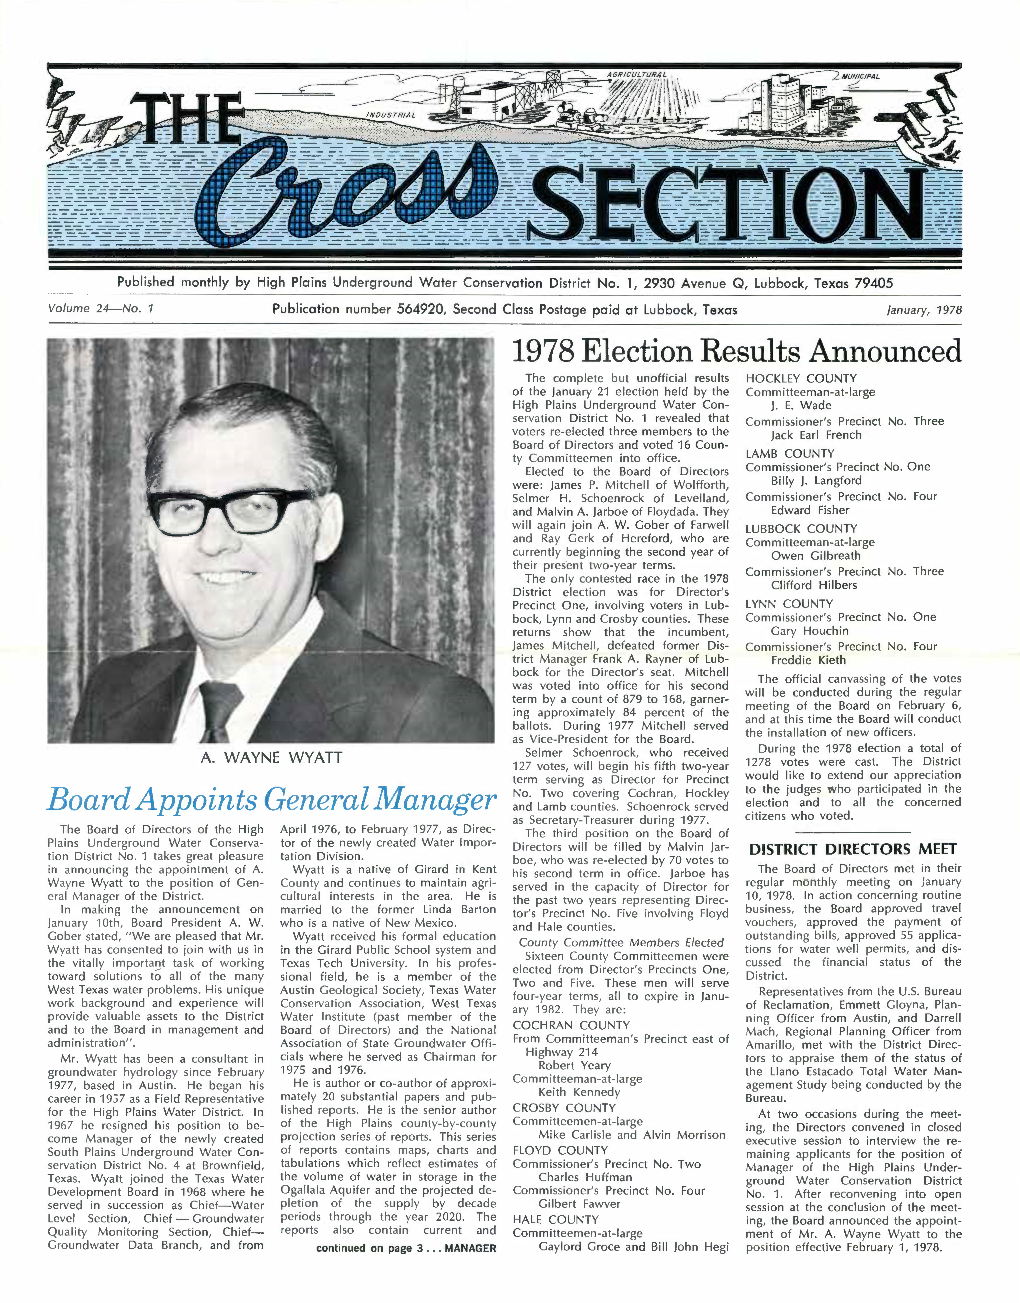 1978 Election Results Announced Board Appoints General Manager